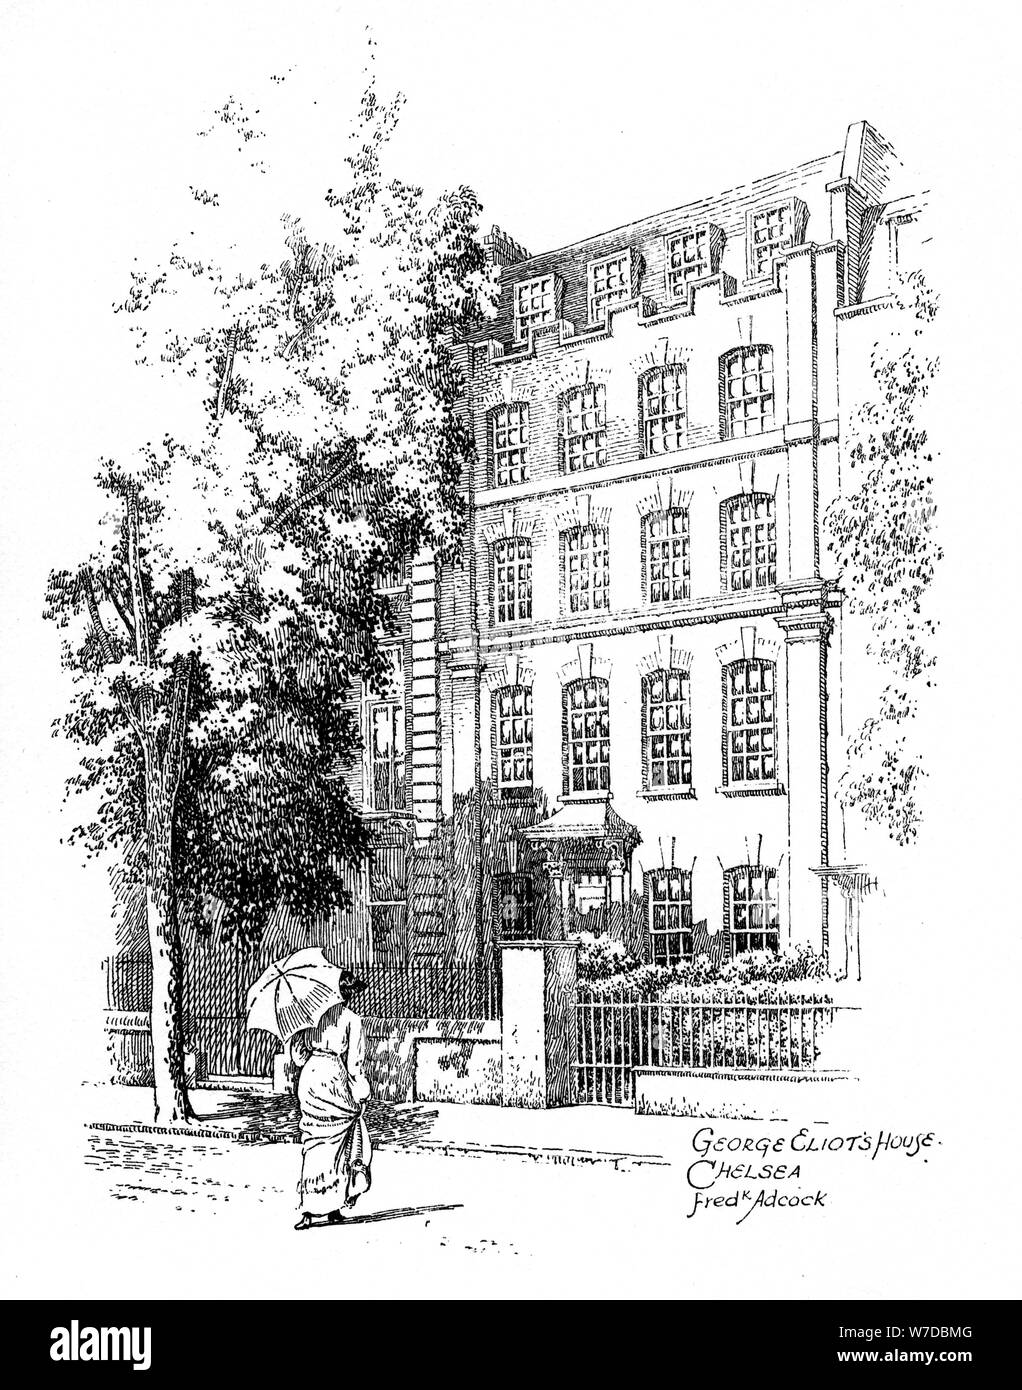 George Eliot's house, Chelsea, Londres, 1912. Artiste : Frederick Adcock Banque D'Images